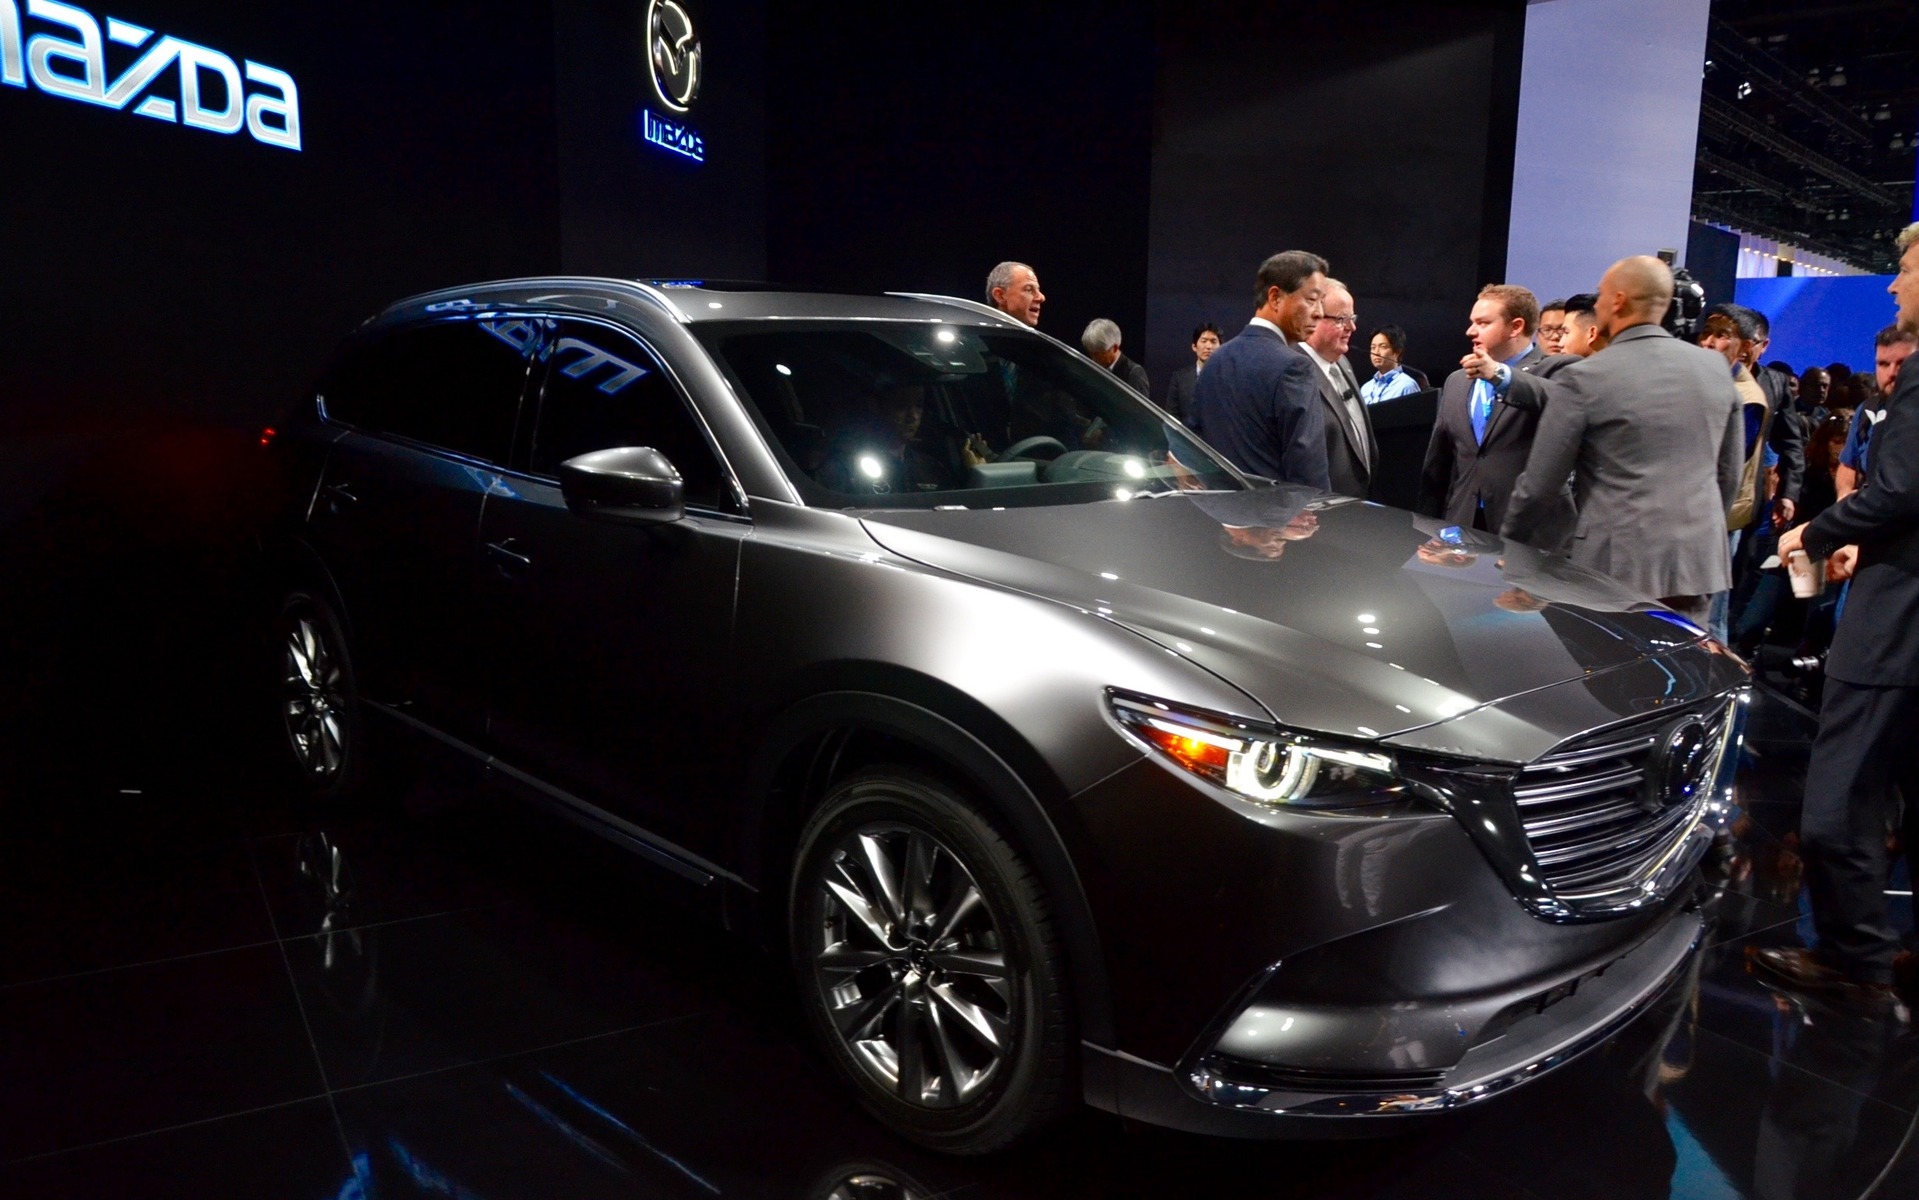 The 2016 Mazda CX-9's launch at the 2015 Los Angeles Auto Show.